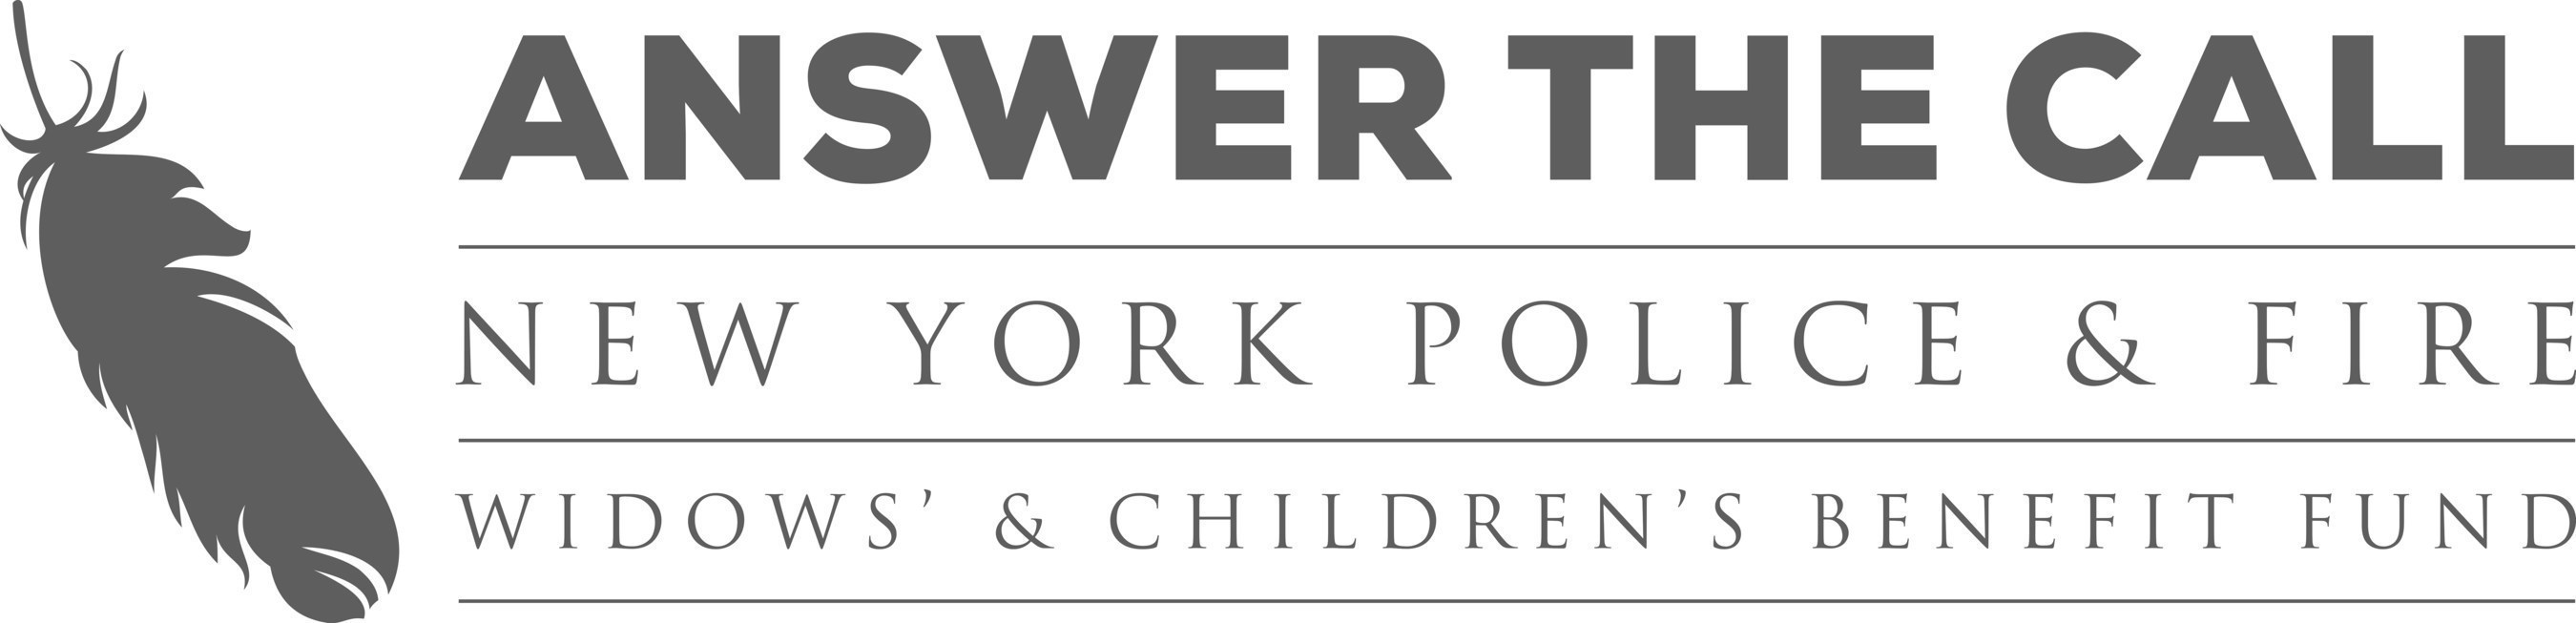 Answer The Call - The New York Police and Fire Widows' and Children's Benefit Fund